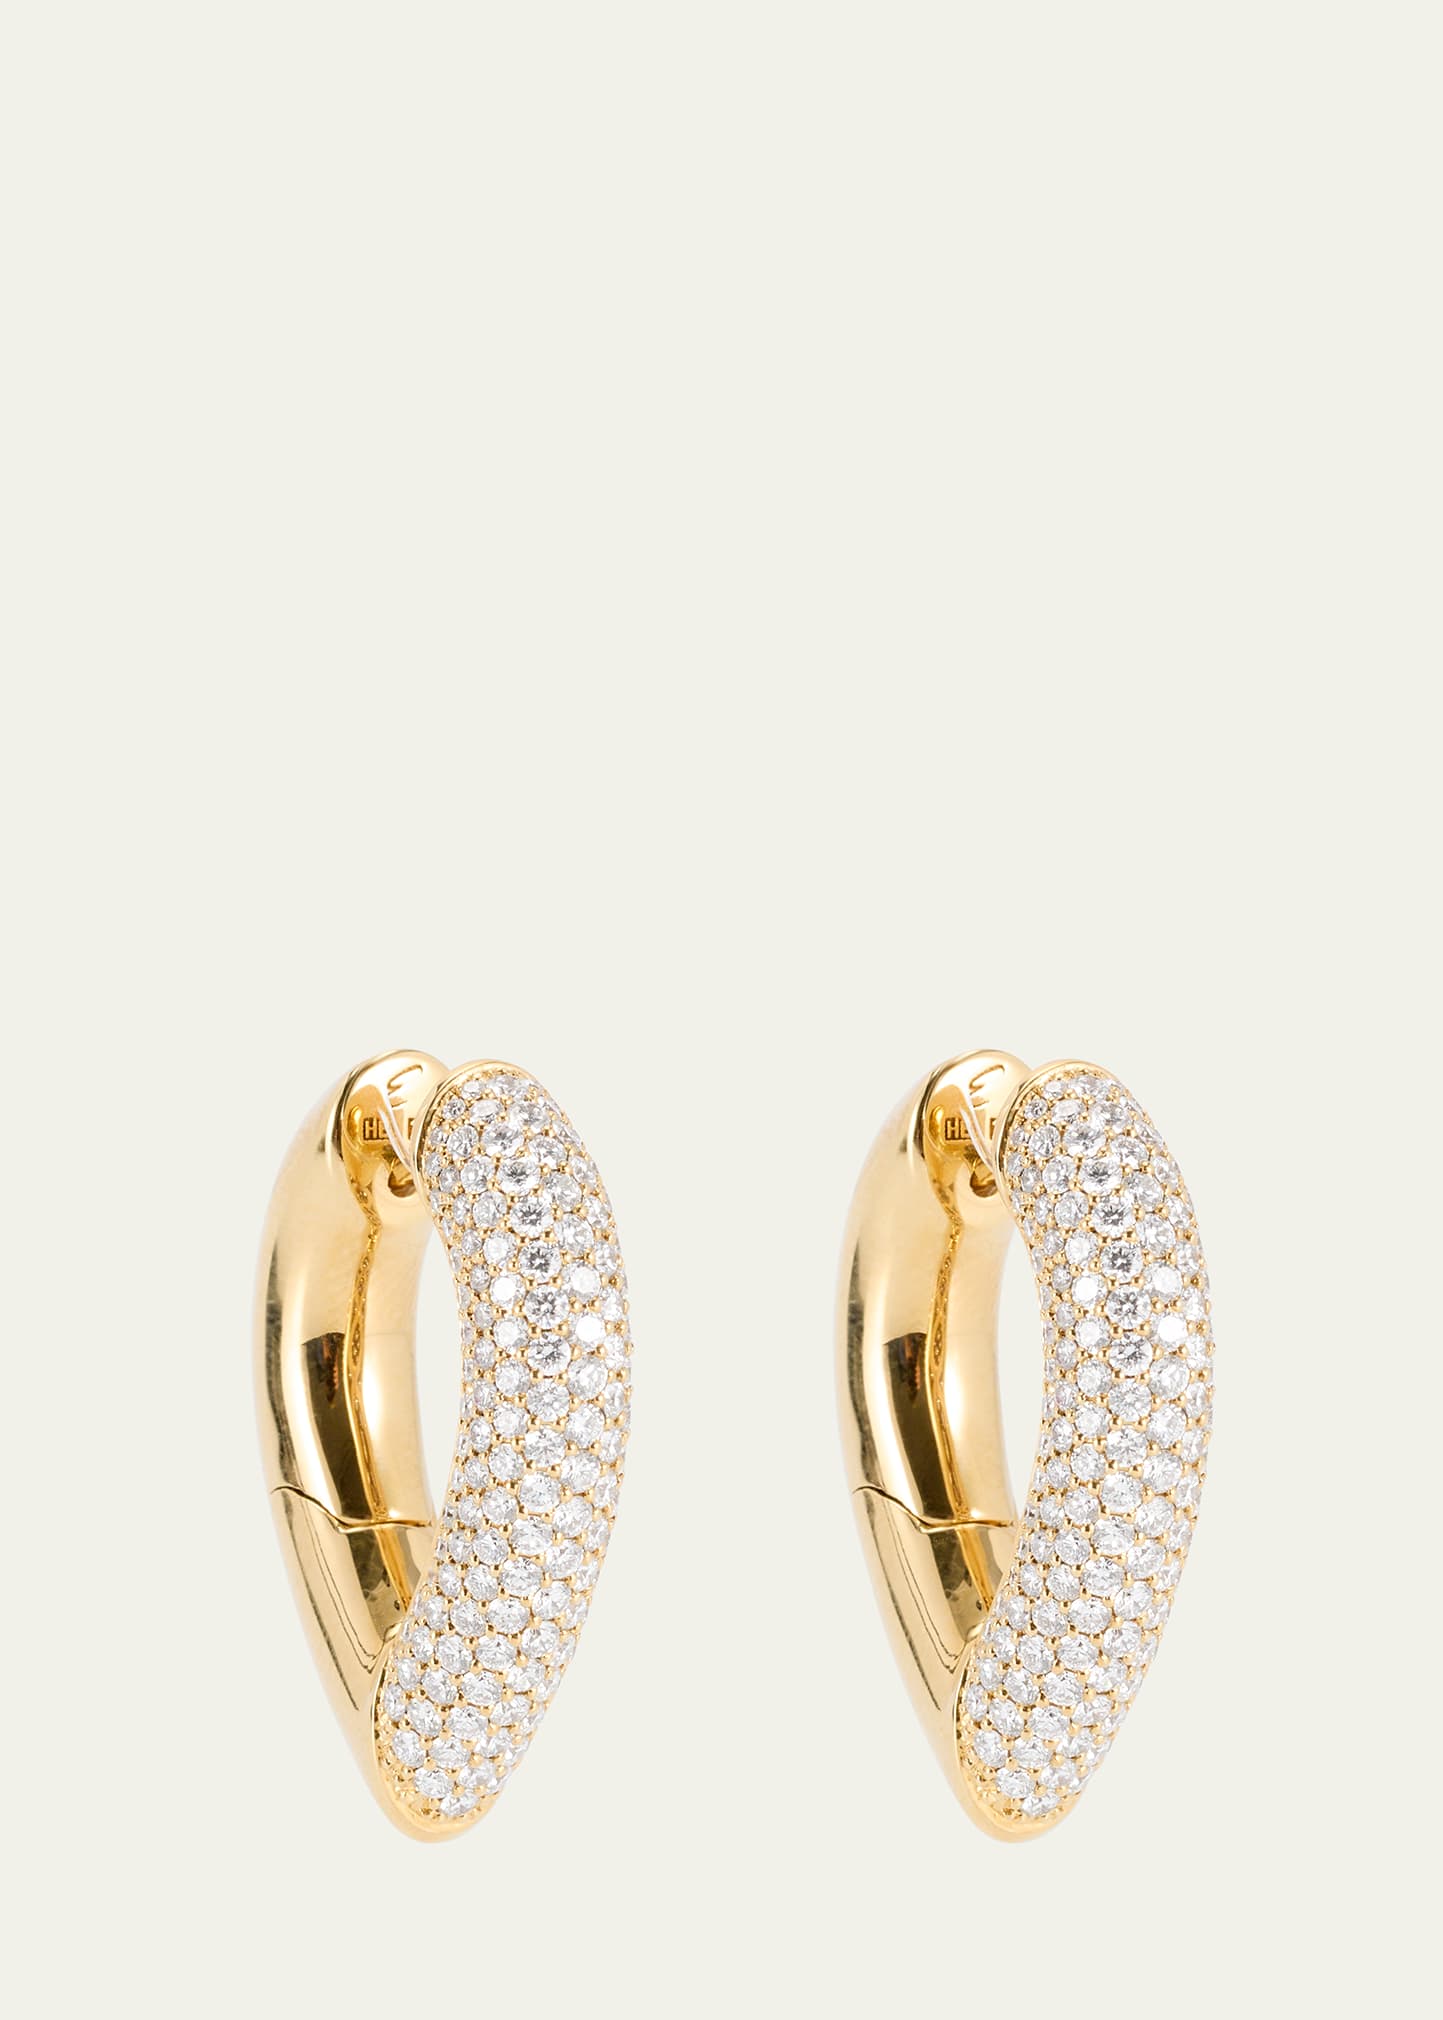 The Drop Link Earrings, Big, in White Gold and White Diamonds